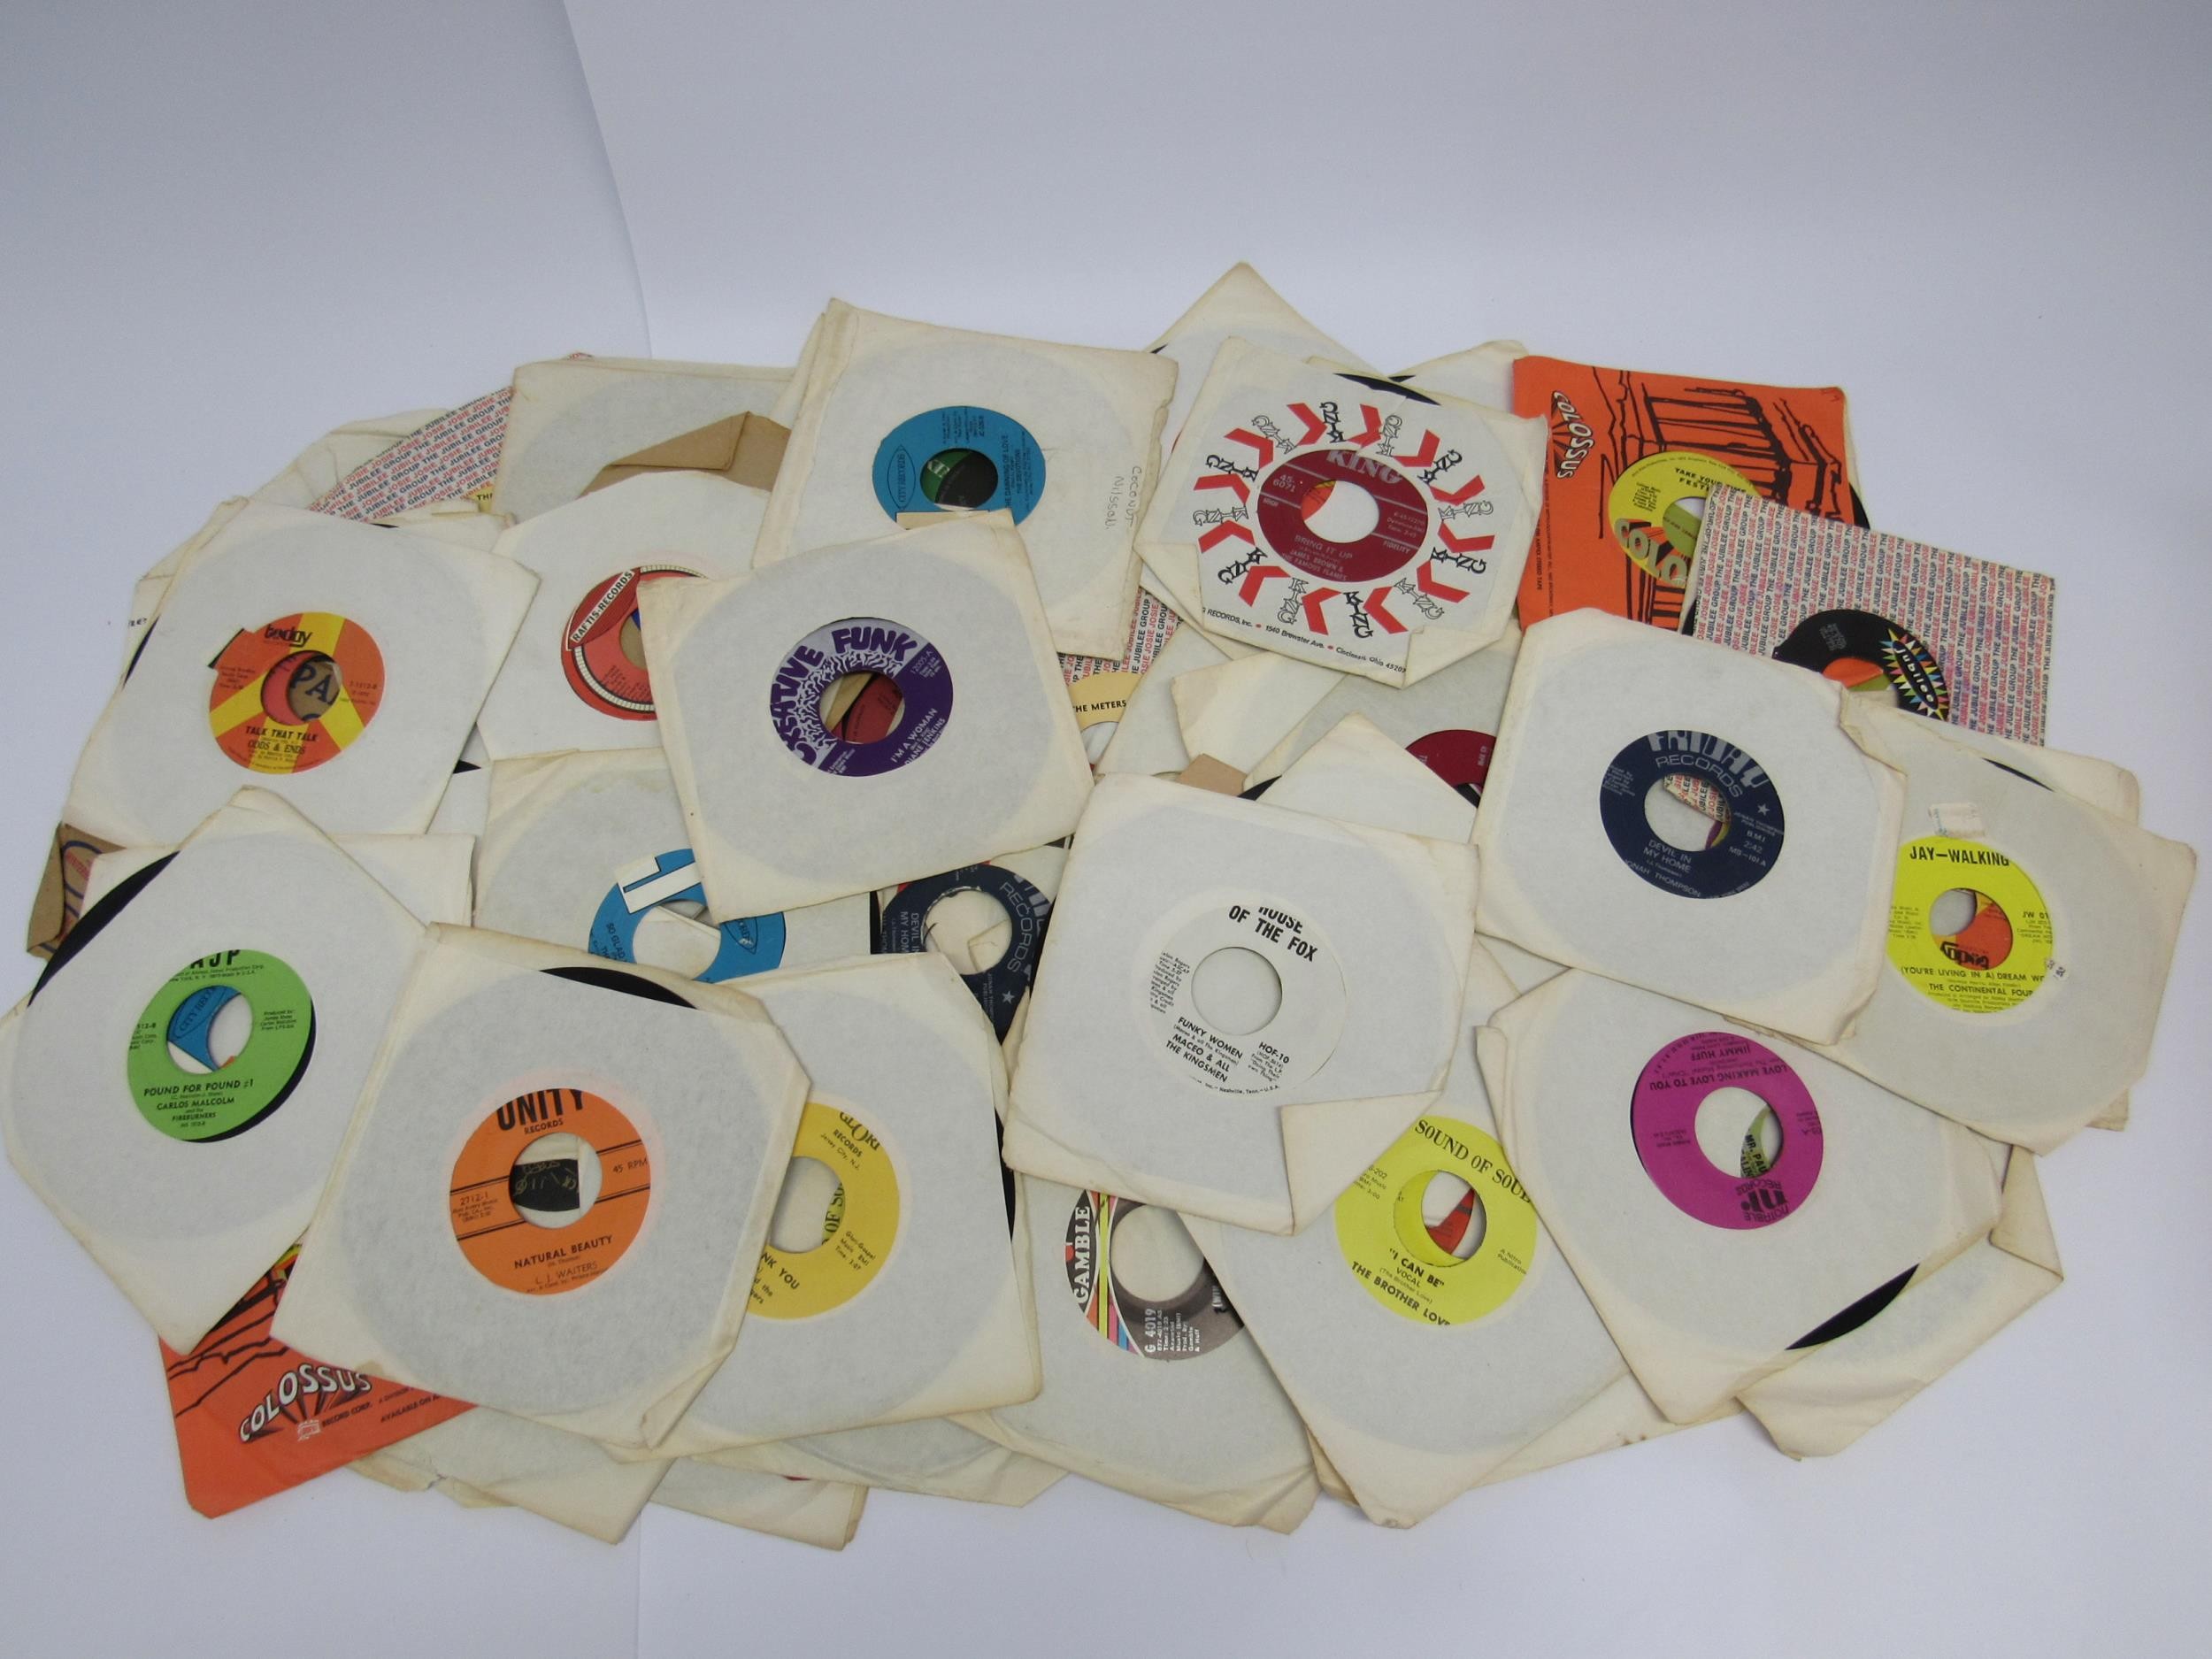 A collection of US Funk, Soul, Gospel and R&B 7" singles including The Meters, Bobby Wilson, The